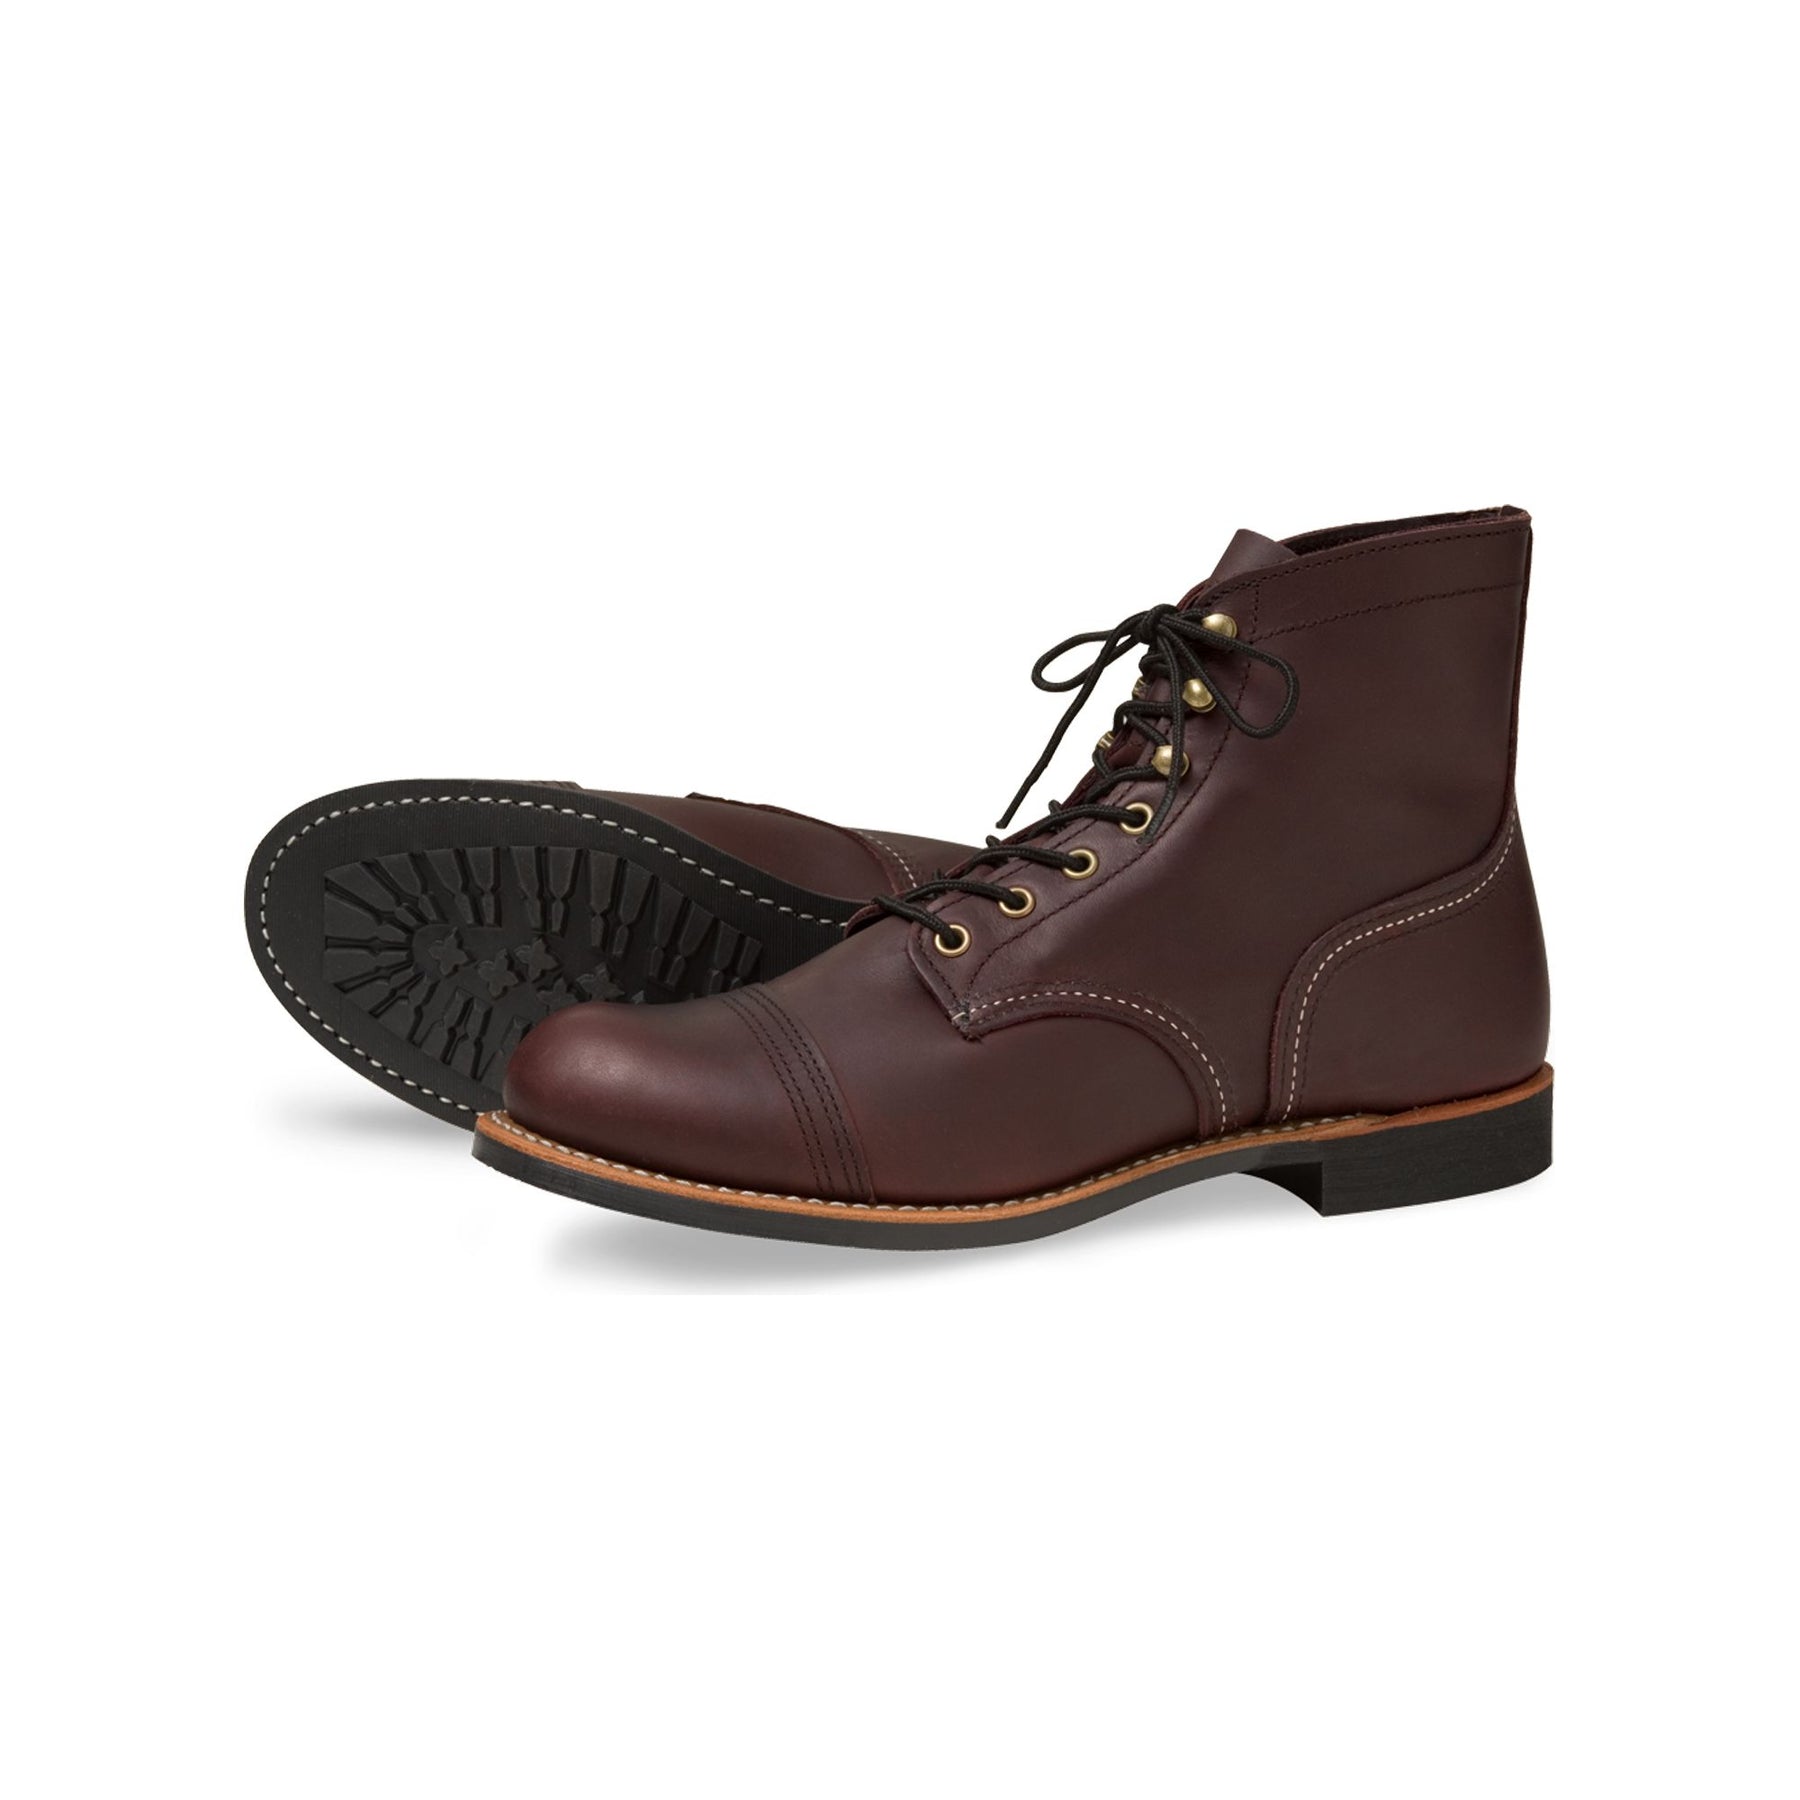 oxblood red wing boots